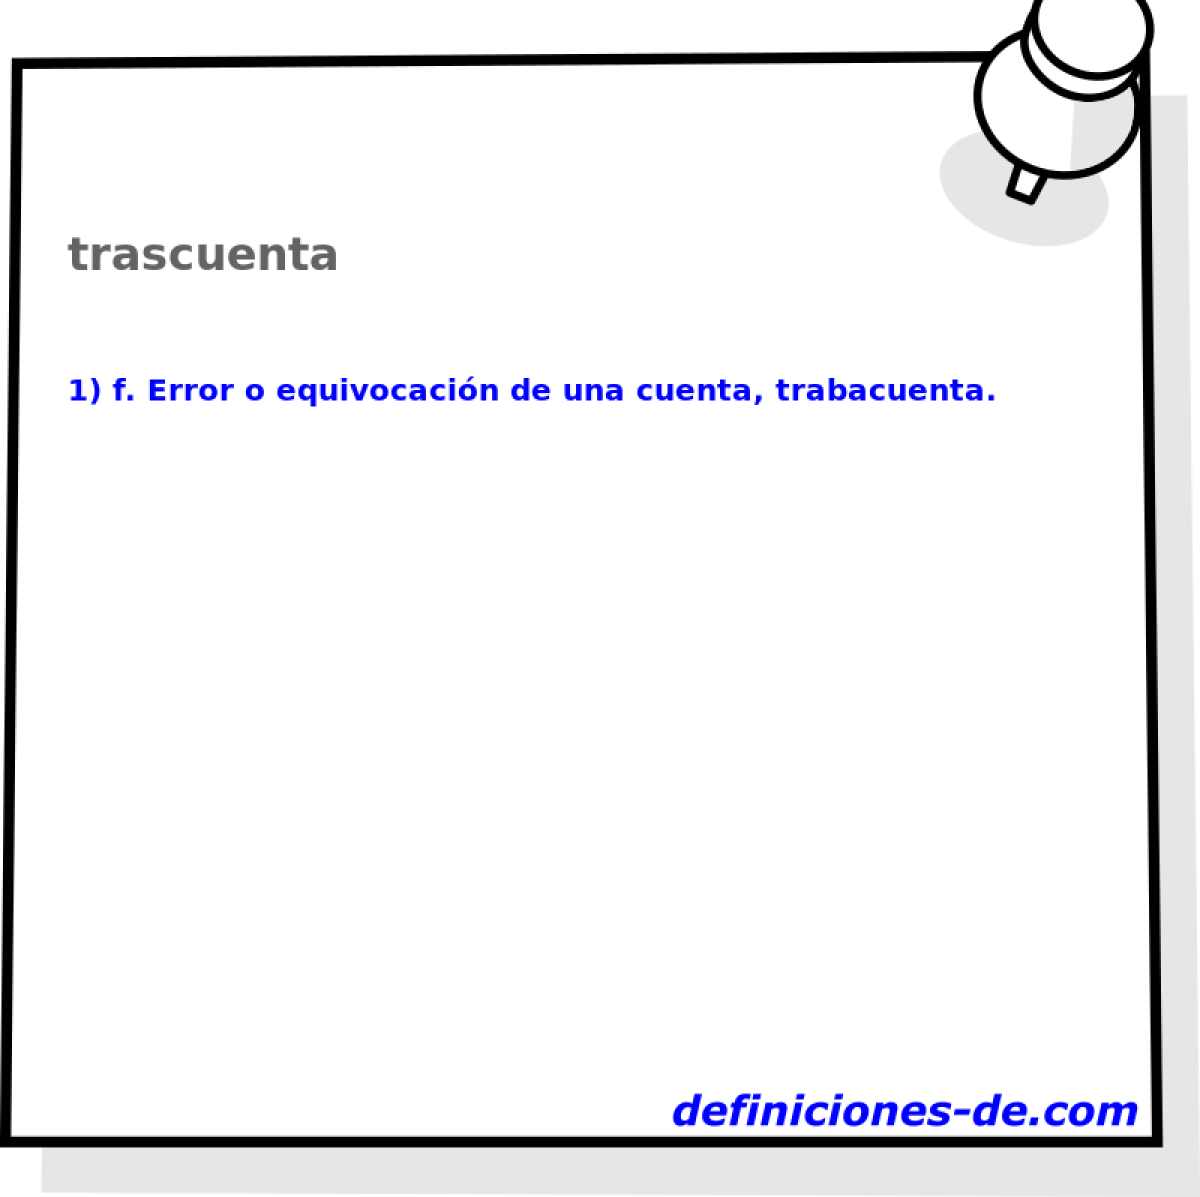 trascuenta 